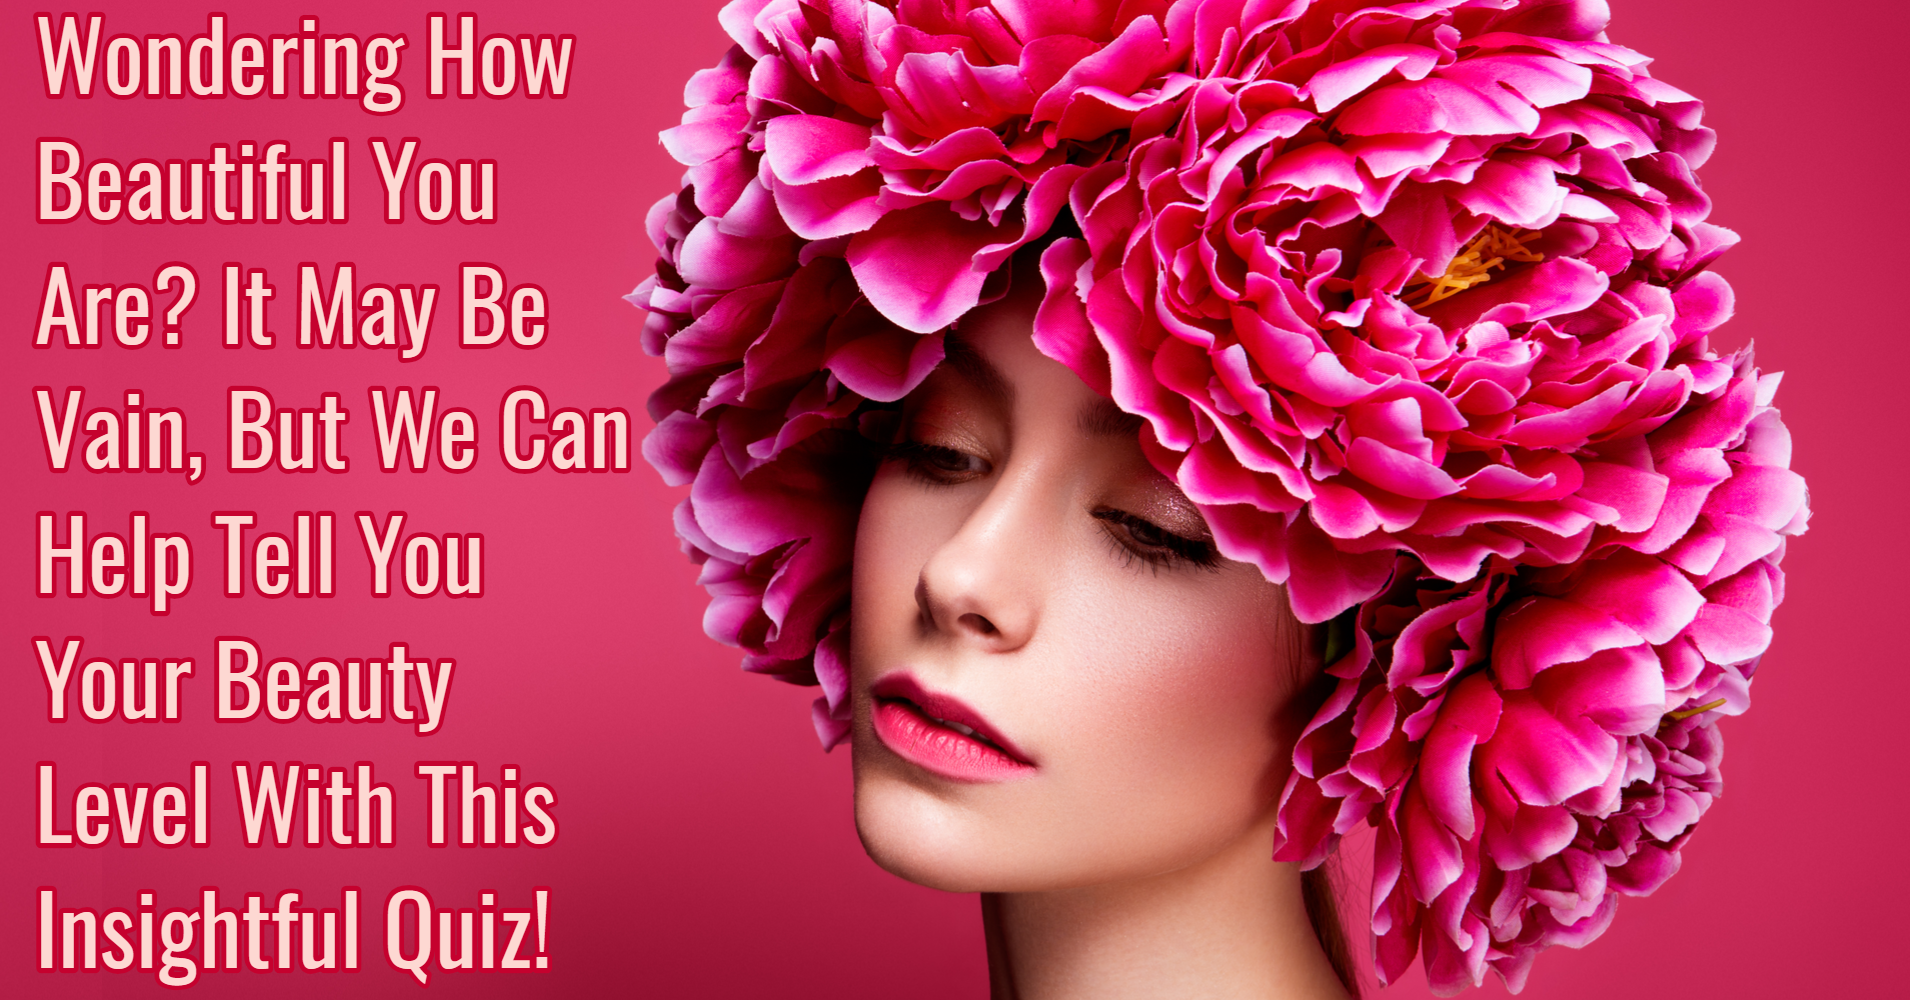 What Is Your Beauty Level? - Quiz - Quizony.com